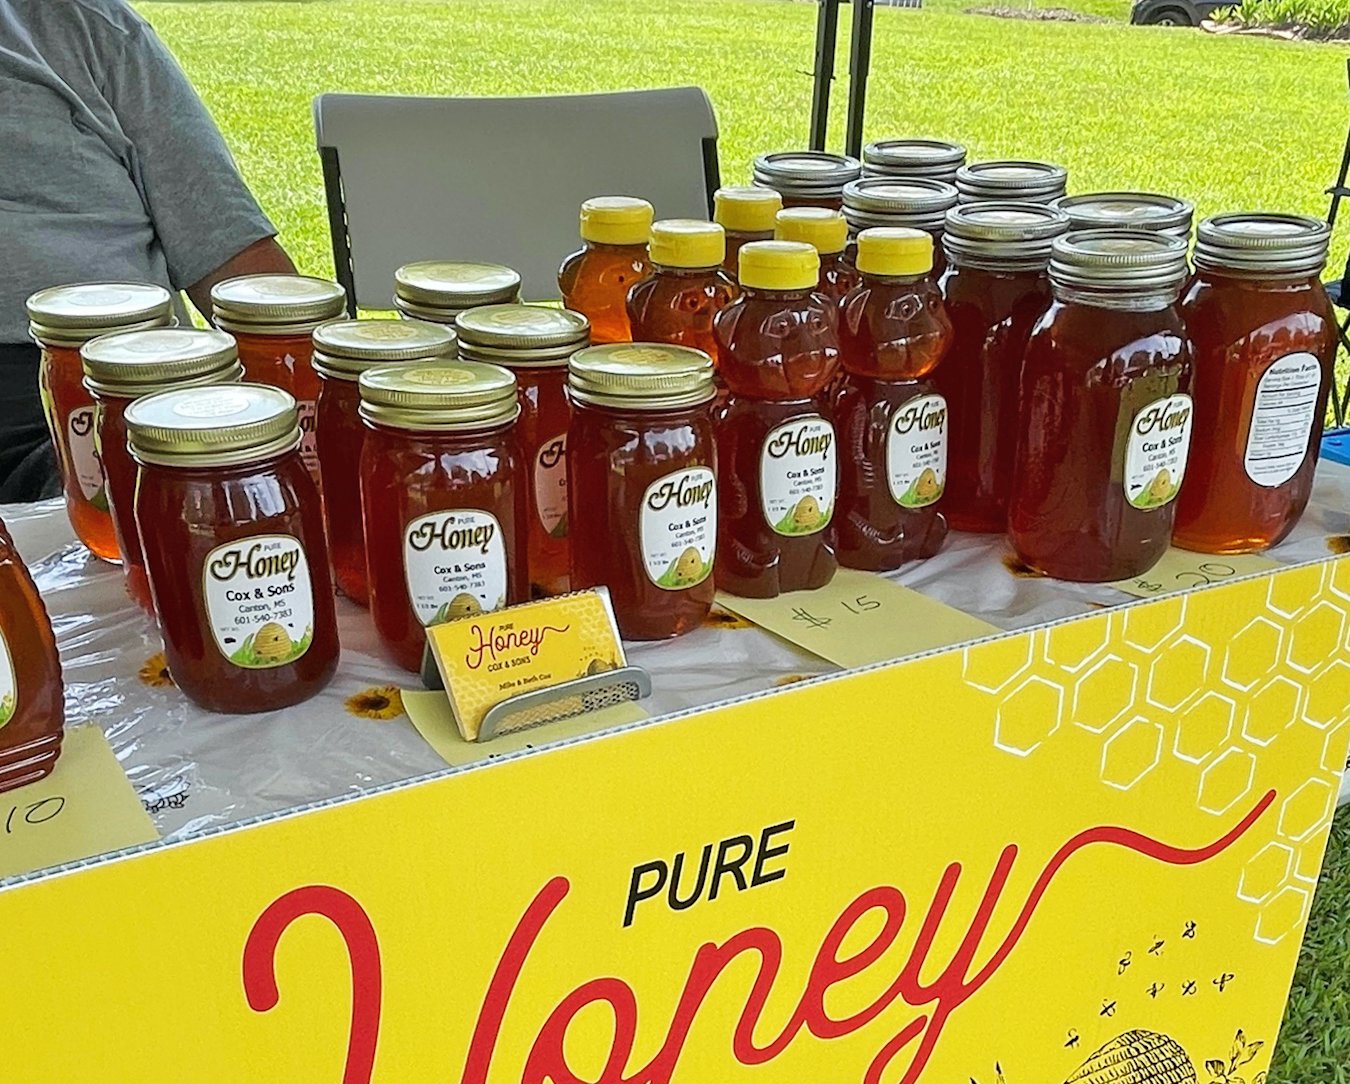 Local honey is one of a number of items available for sale at the Madison Farmers Market.